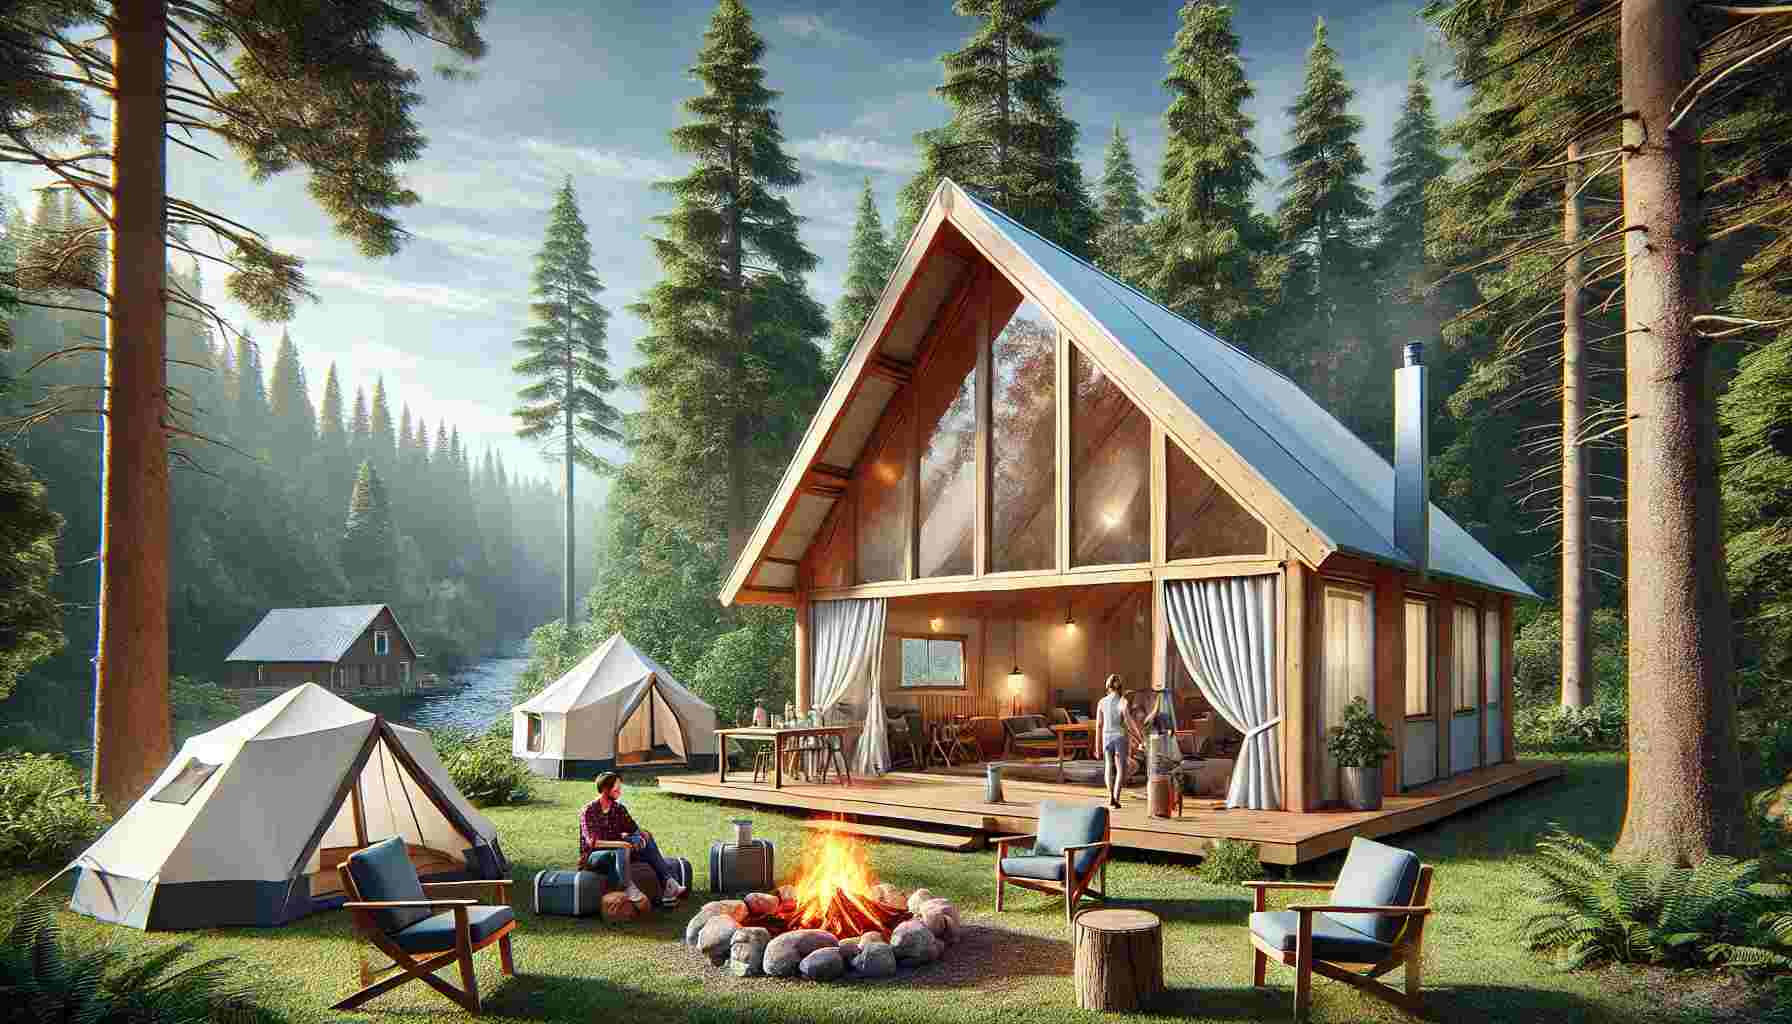 A spacious cabin tent set up in a picturesque forest campsite, with lush green trees and a clear blue sky in the background. The tent has vertical walls, large windows, and a high ceiling. In front of the tent, a family is gathered around a campfire, with camping chairs and gear scattered around, creating a cozy and inviting atmosphere.